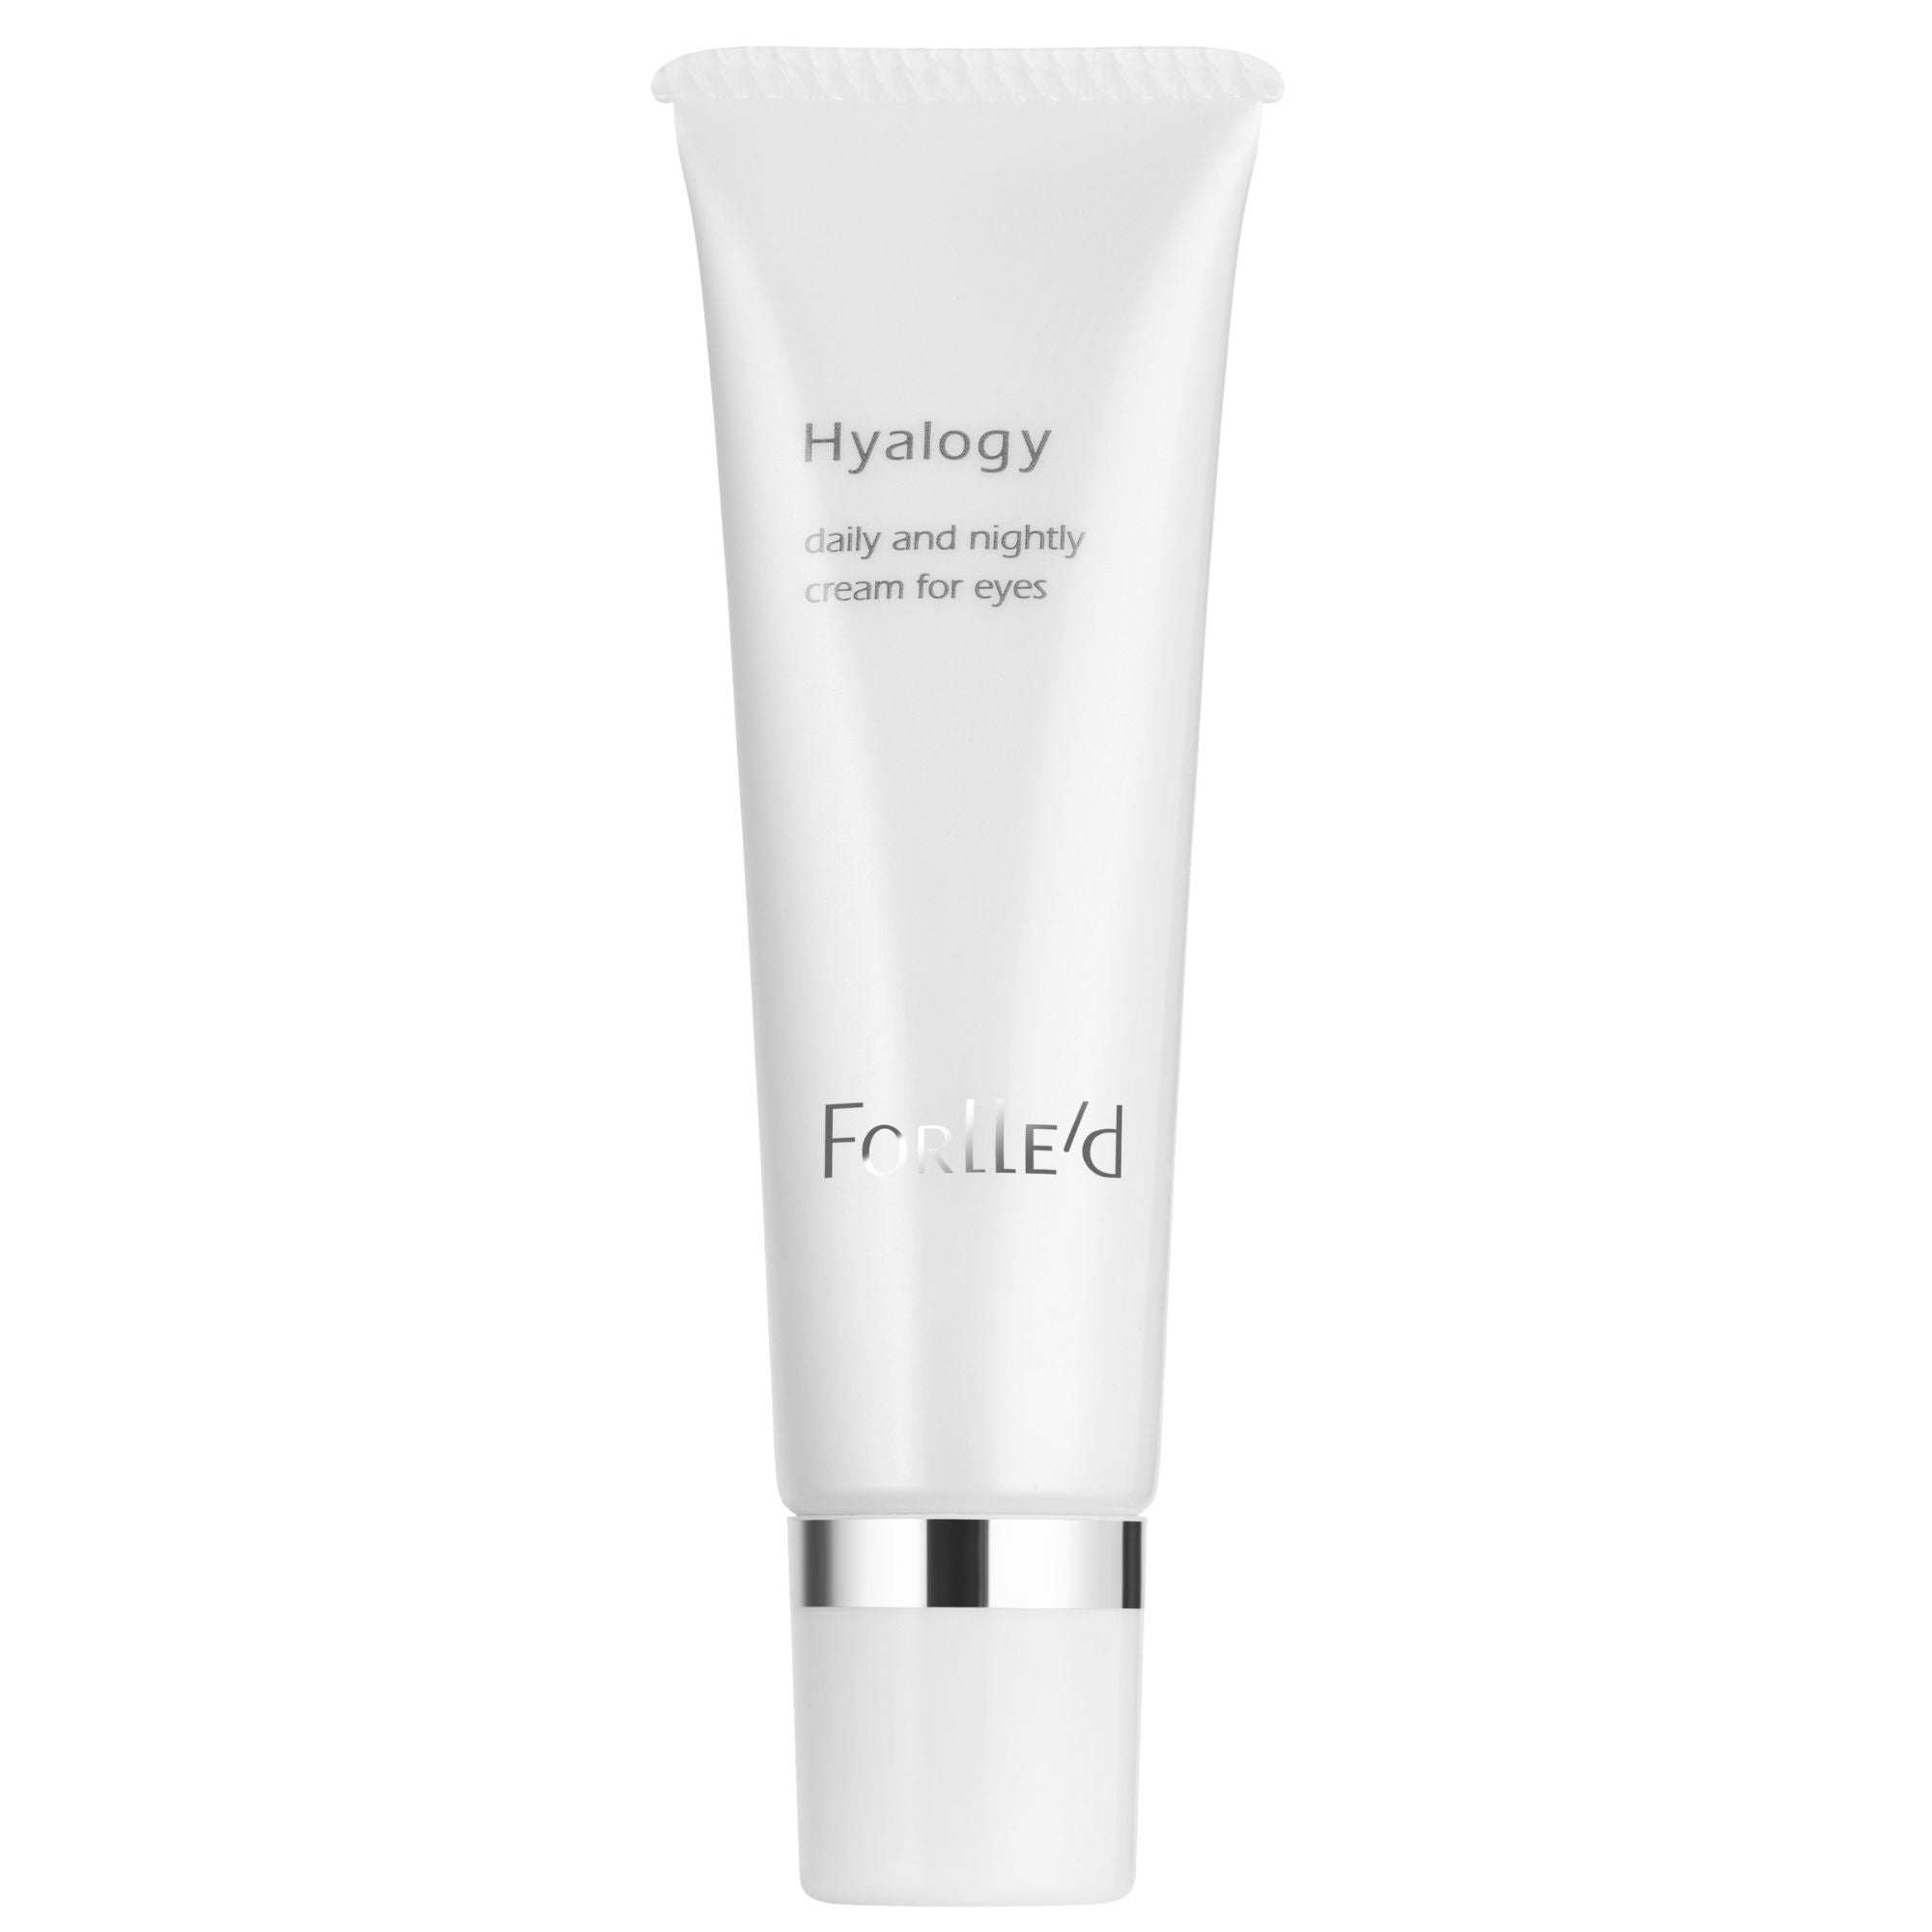 Forlle'd Hyalogy Daily and Nightly Cream for Eyes (30ml)